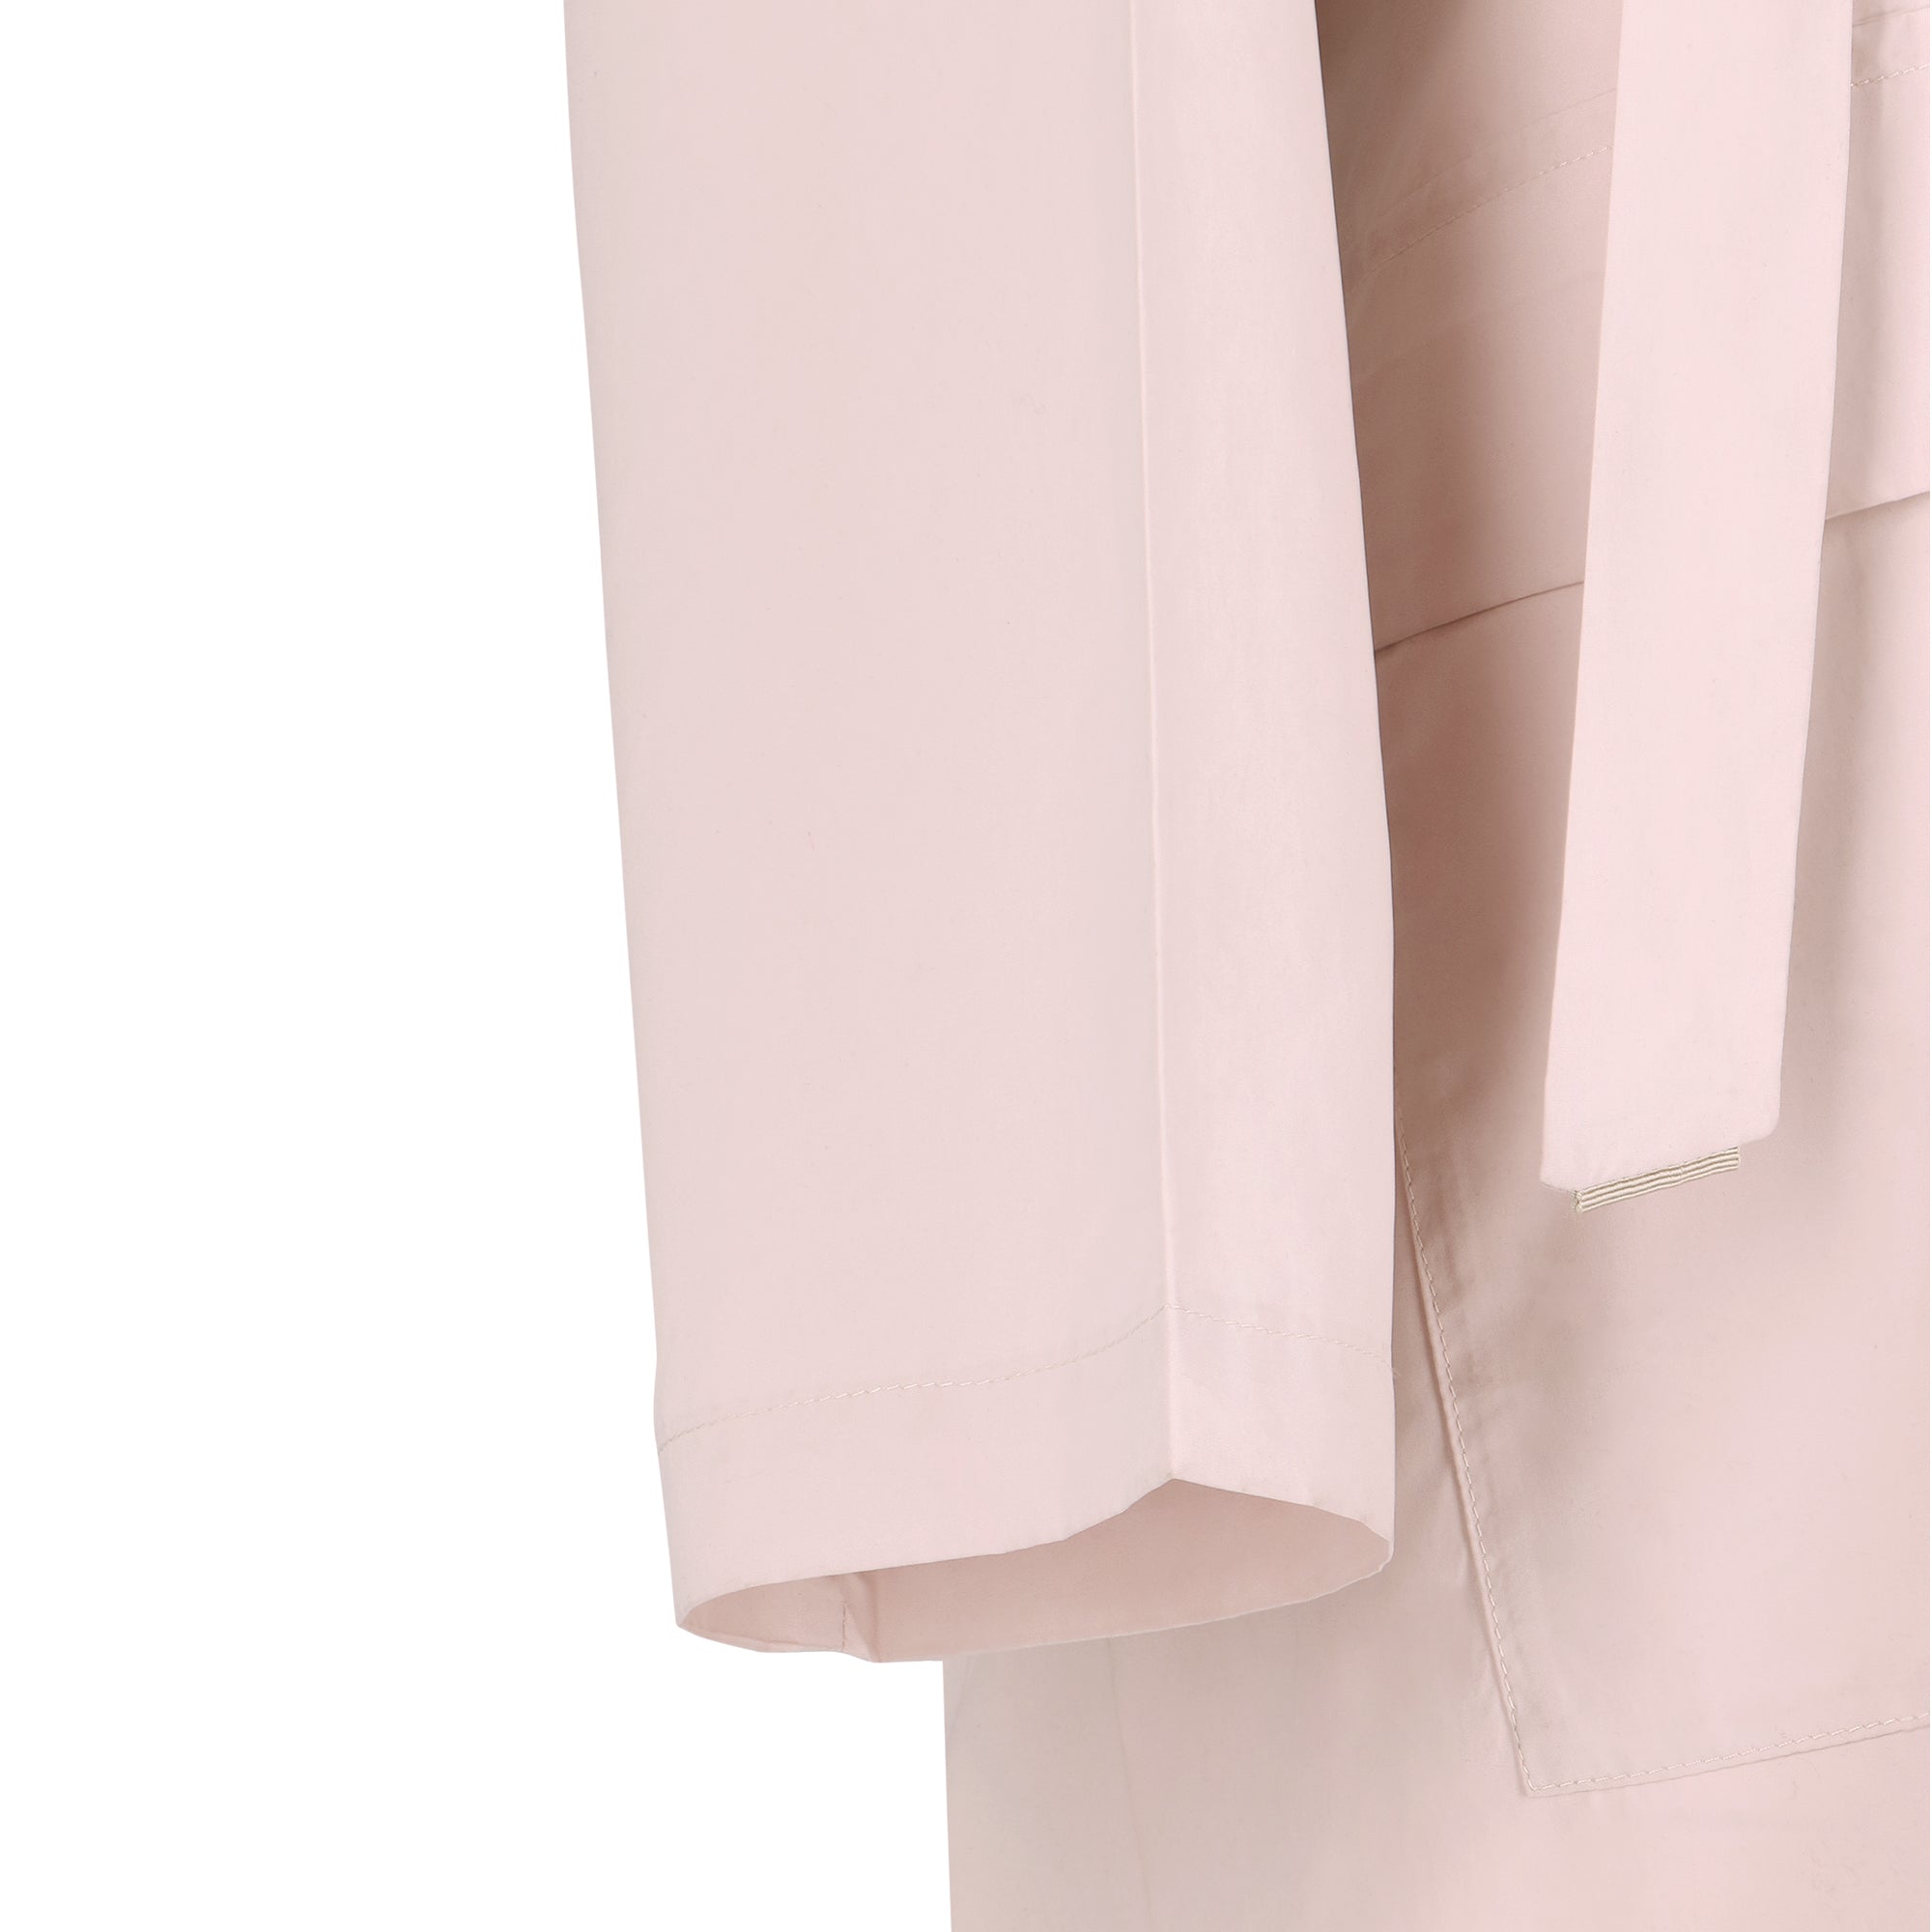 The classic raincoat - nude color - sleeve detail